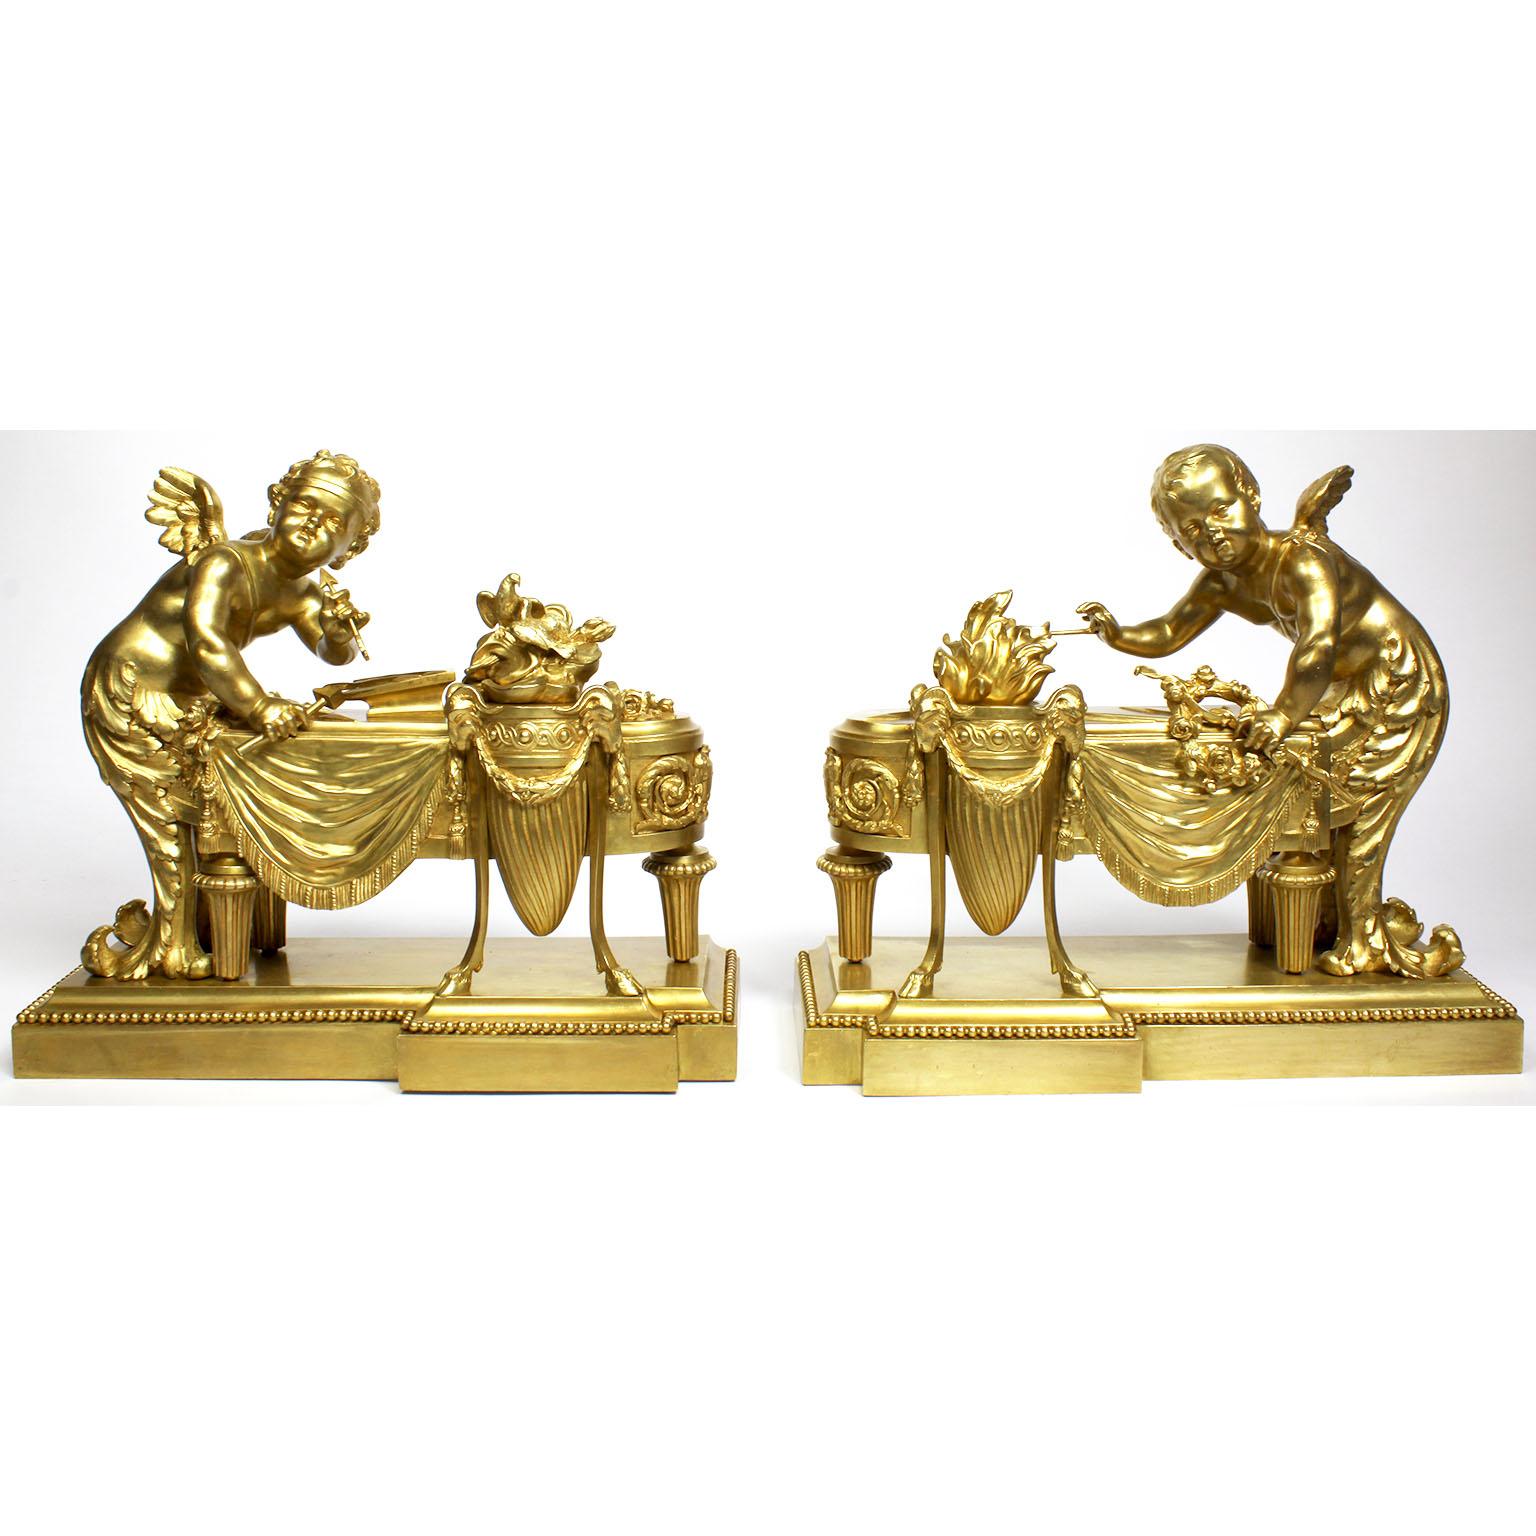 A very fine and charming pair of French 19th-20th century Louis XV style Belle Époque figural gilt-bronze chenets. The finely chased whimsical ormolu andirons, each surmounted with a figure of a standing cupid or cherub, both angel blacksmiths